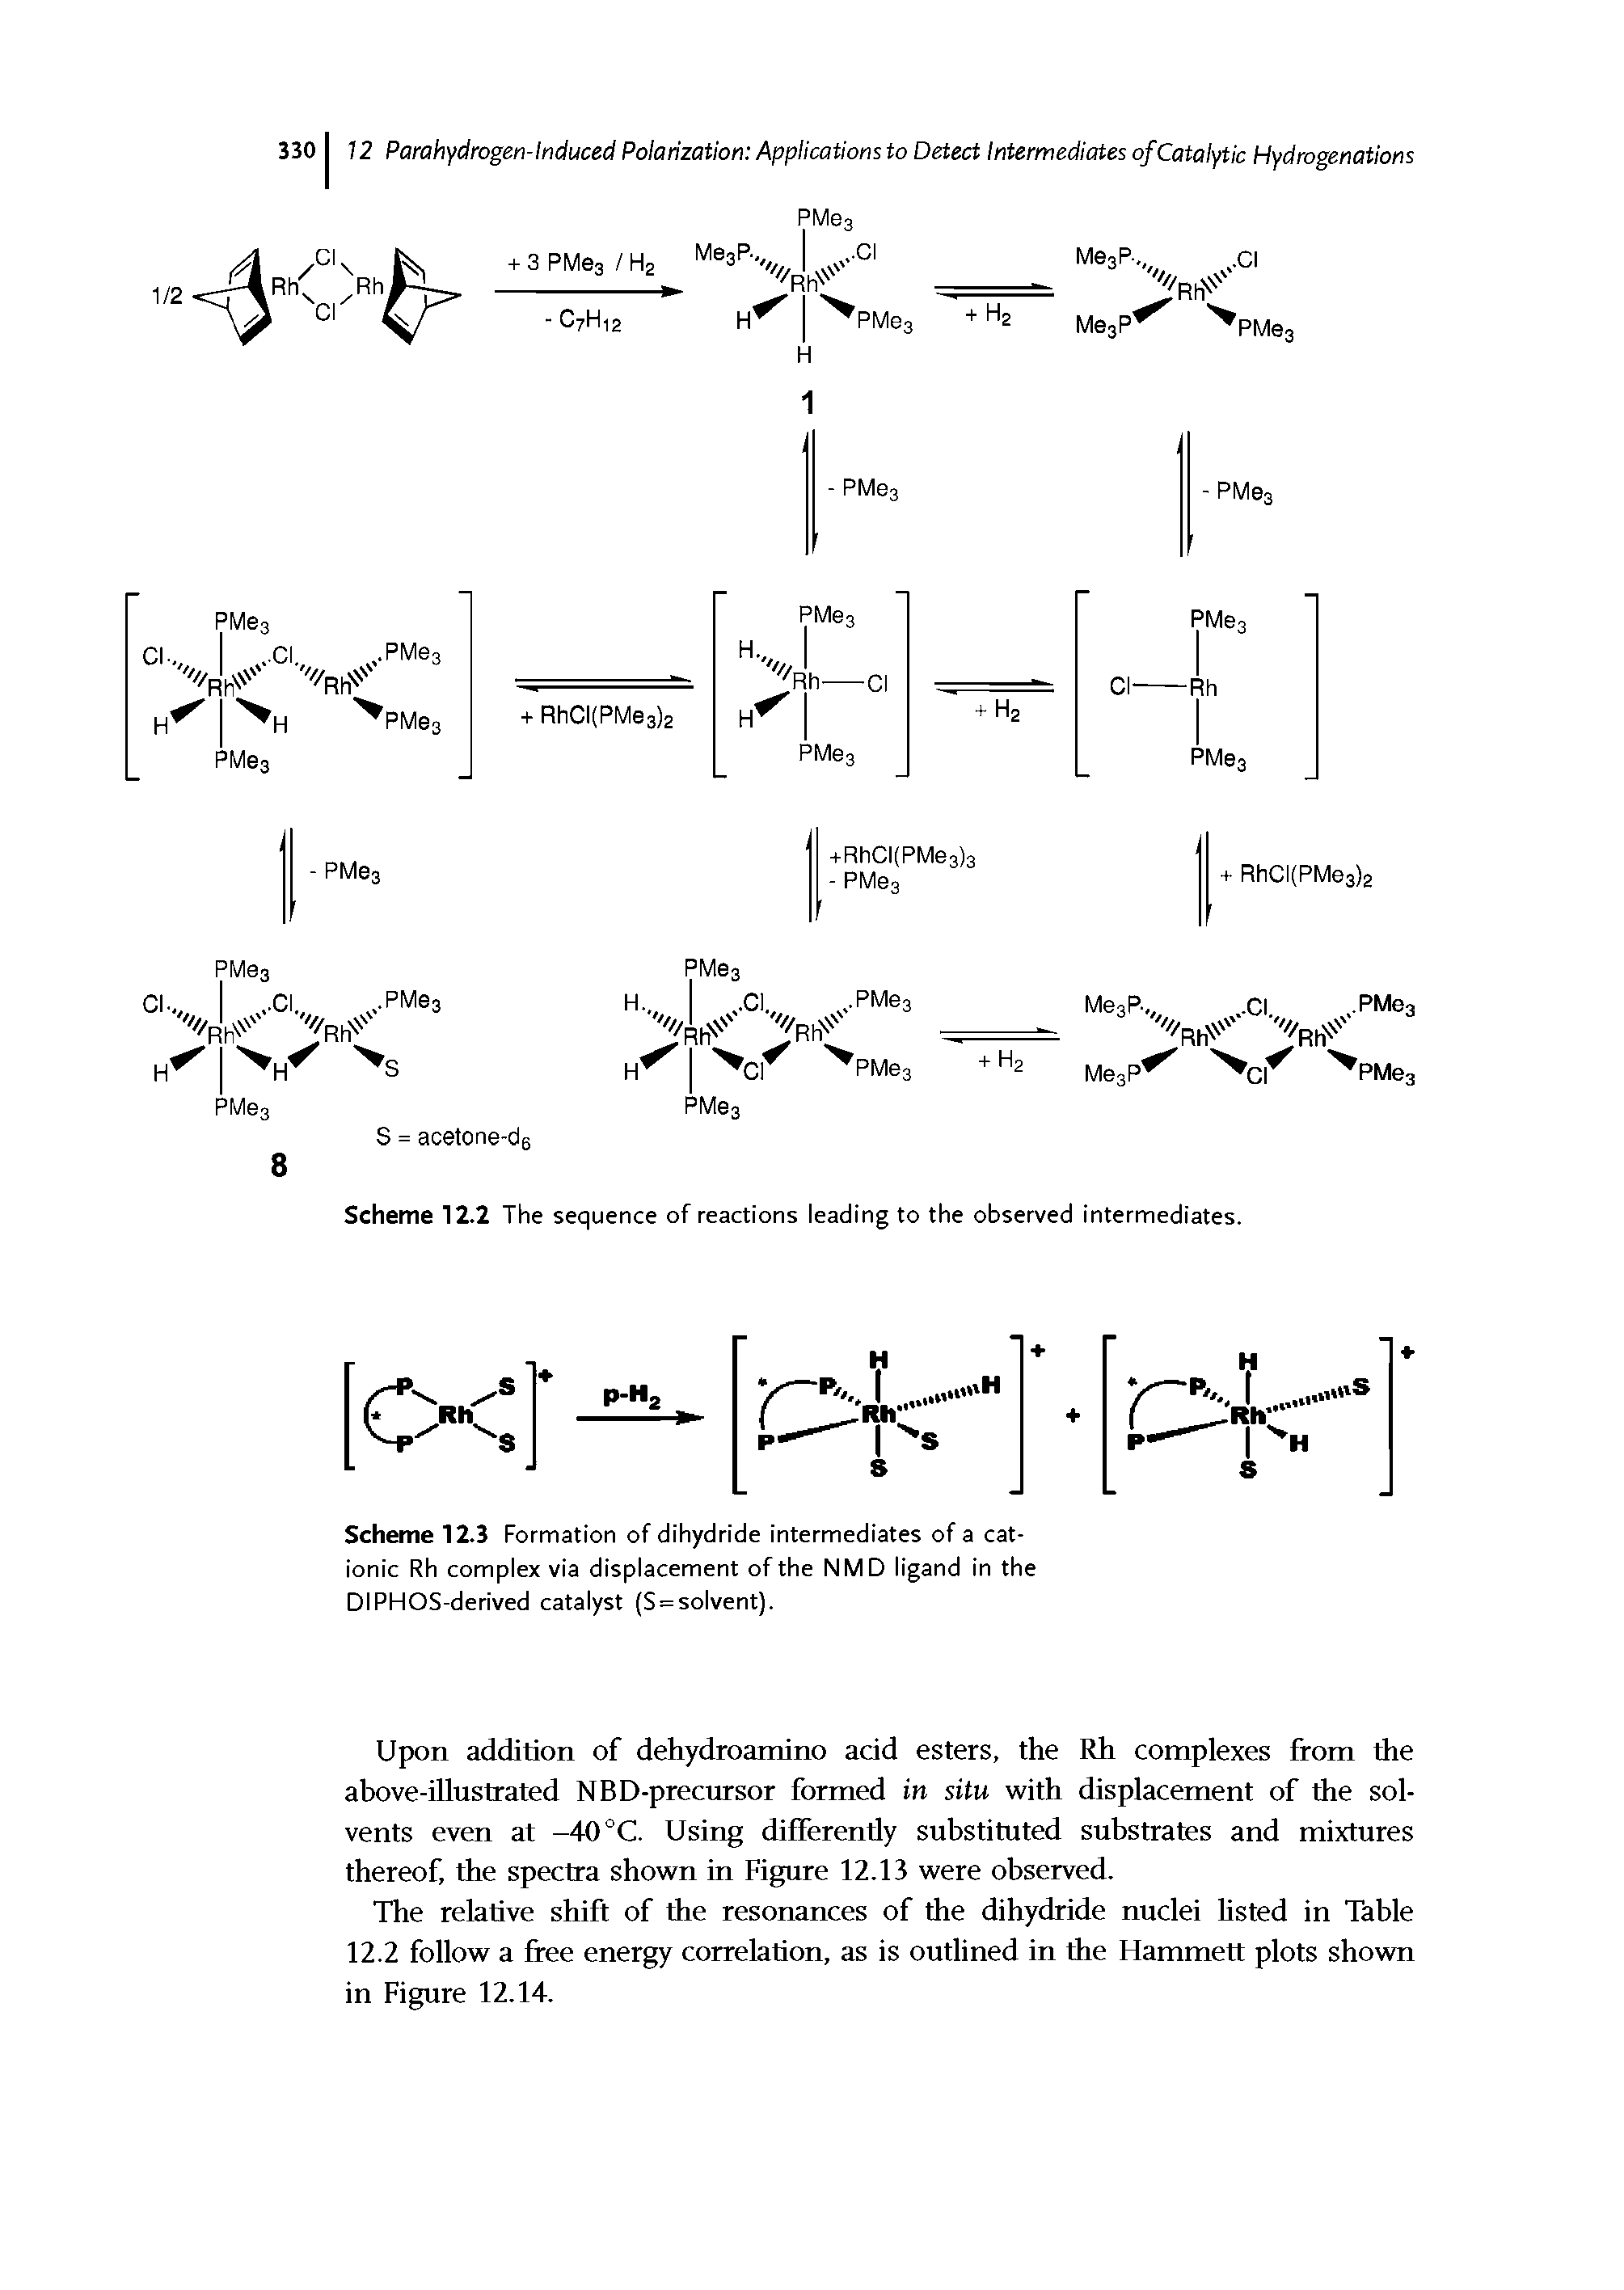 Scheme 12.3 Formation of dihydride intermediates of a cationic Rh complex via displacement of the NMD ligand in the DIPHOS-derived catalyst (S = solvent).